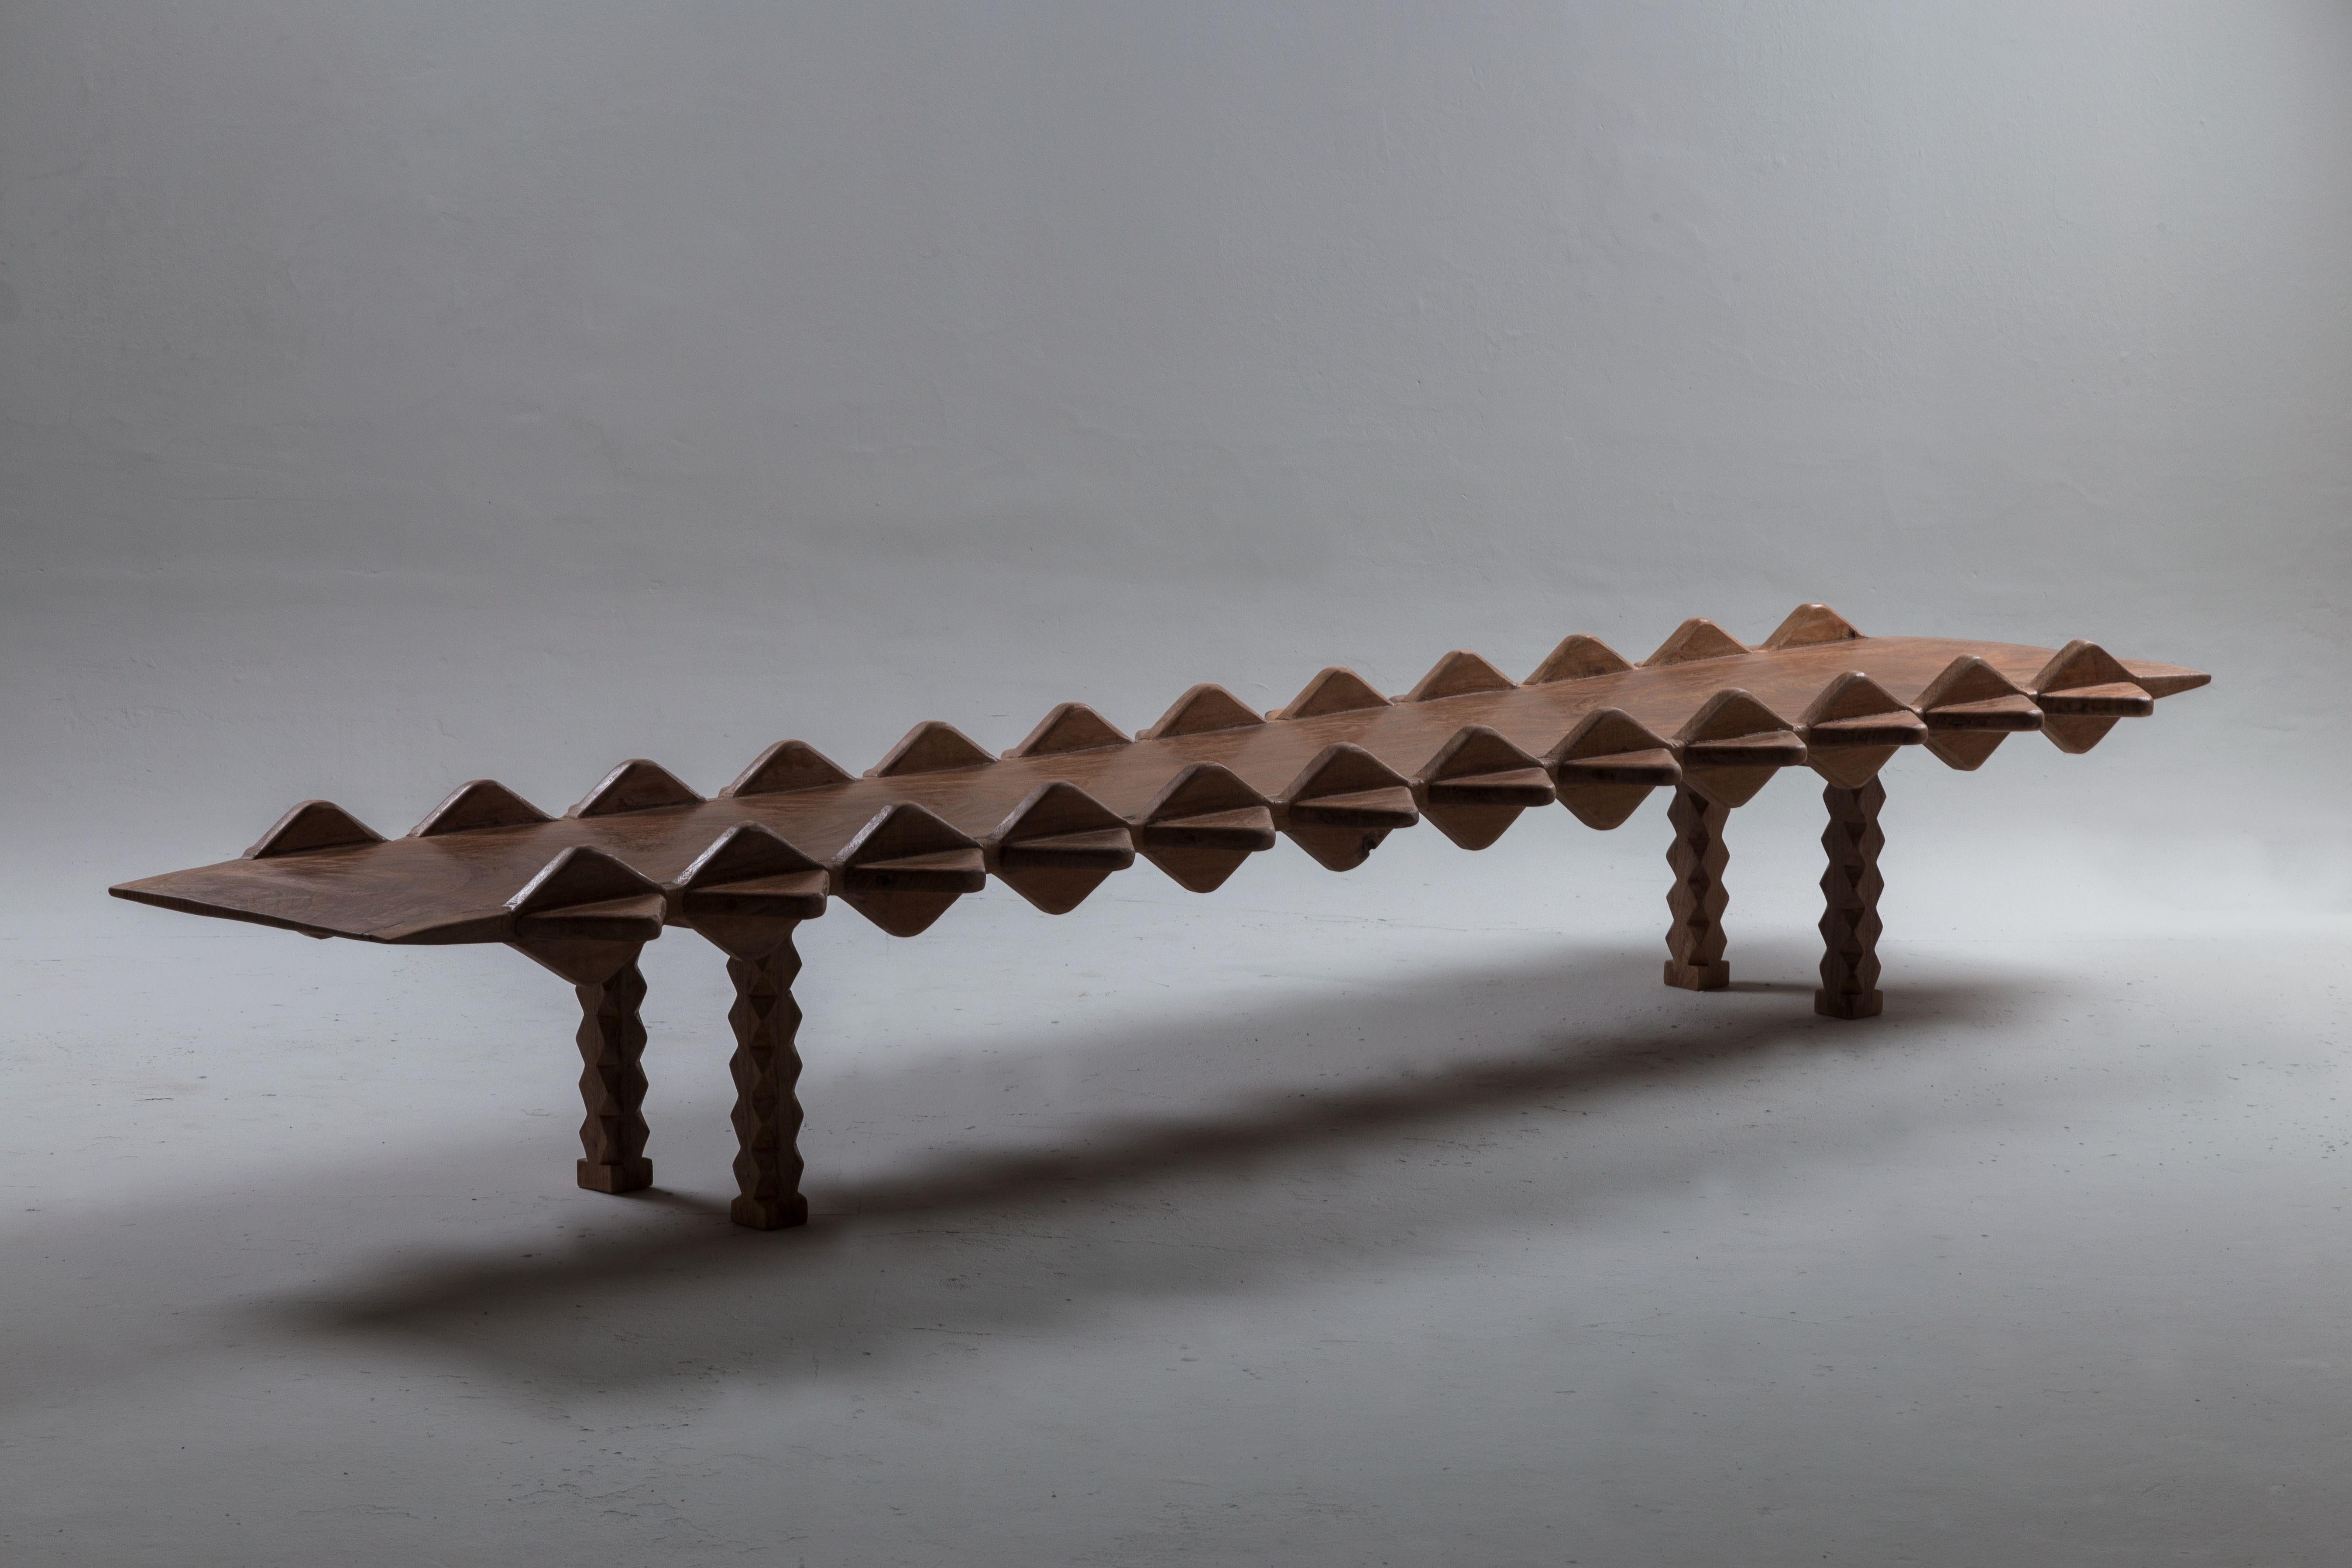 Yacaré low table by Cristián Mohaded
Limited edition.
Dimensions: 54 D x 240 W x 32.2 H cm.
Materials: handmade algarrobo wood + natural wax finishing

This pieces are named after a South American reptile from the caiman alligator family. It